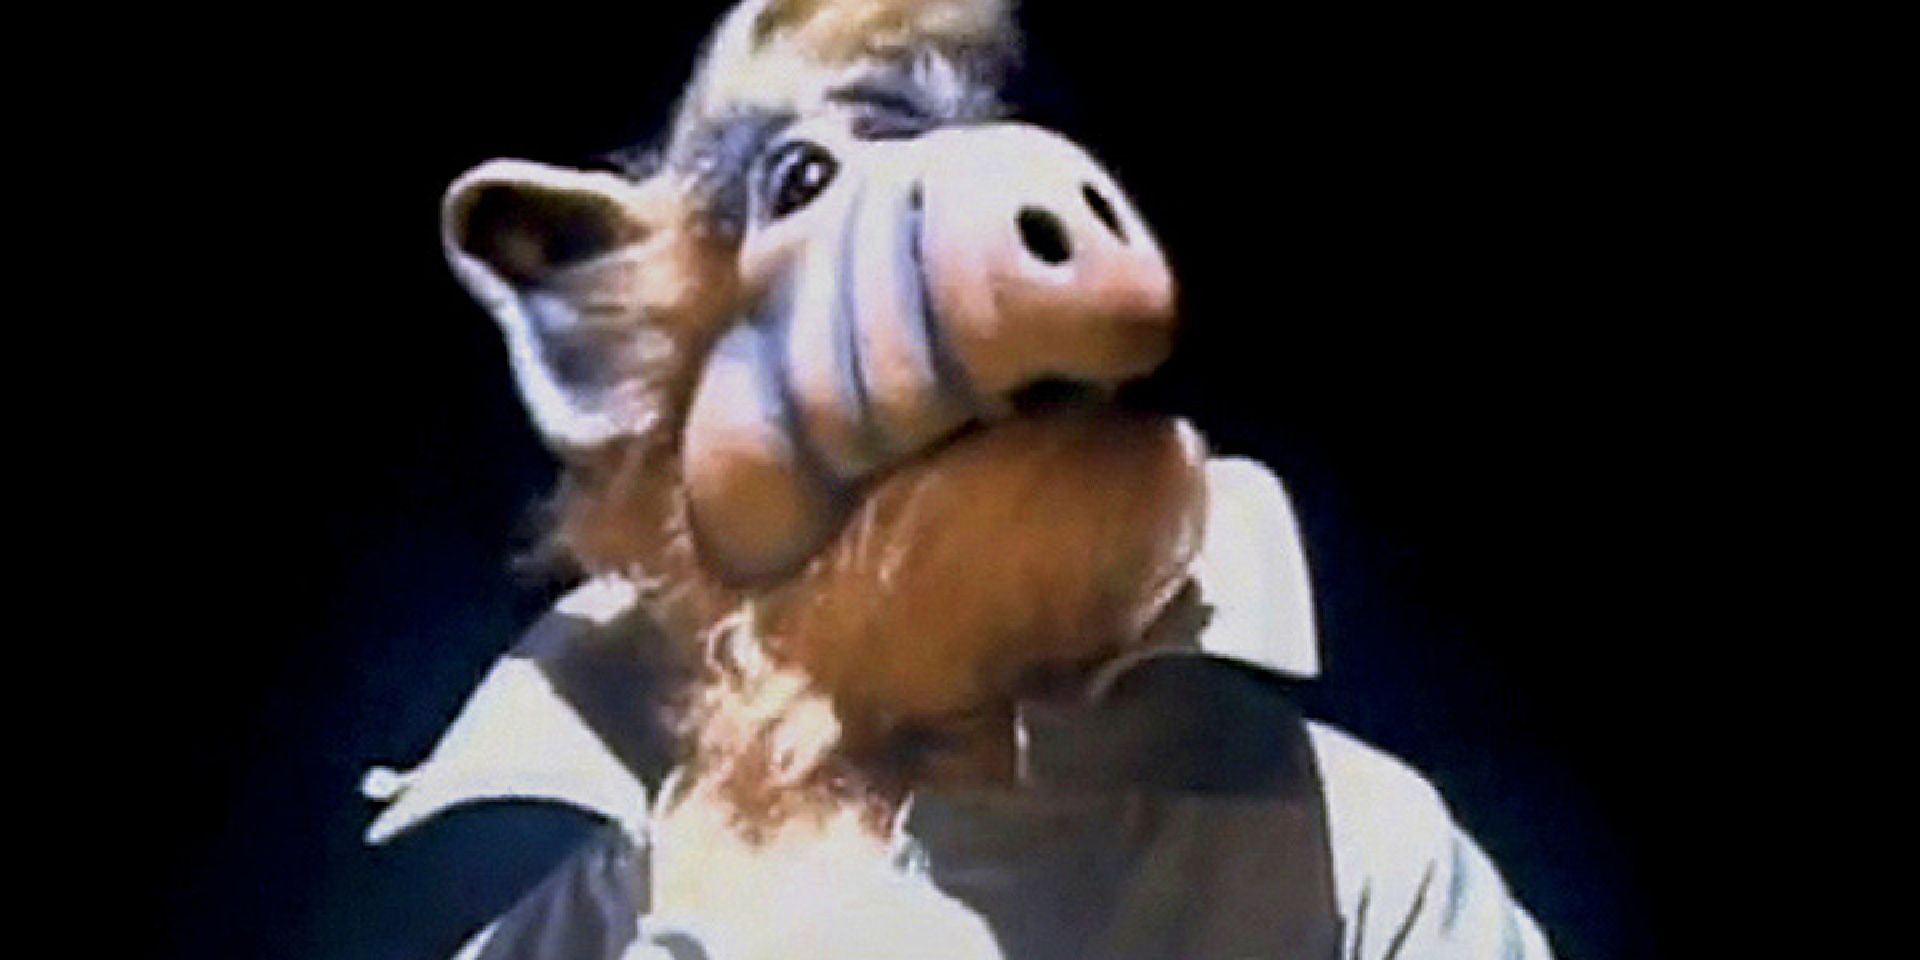 ALF is about to get captured in the ALF series finale